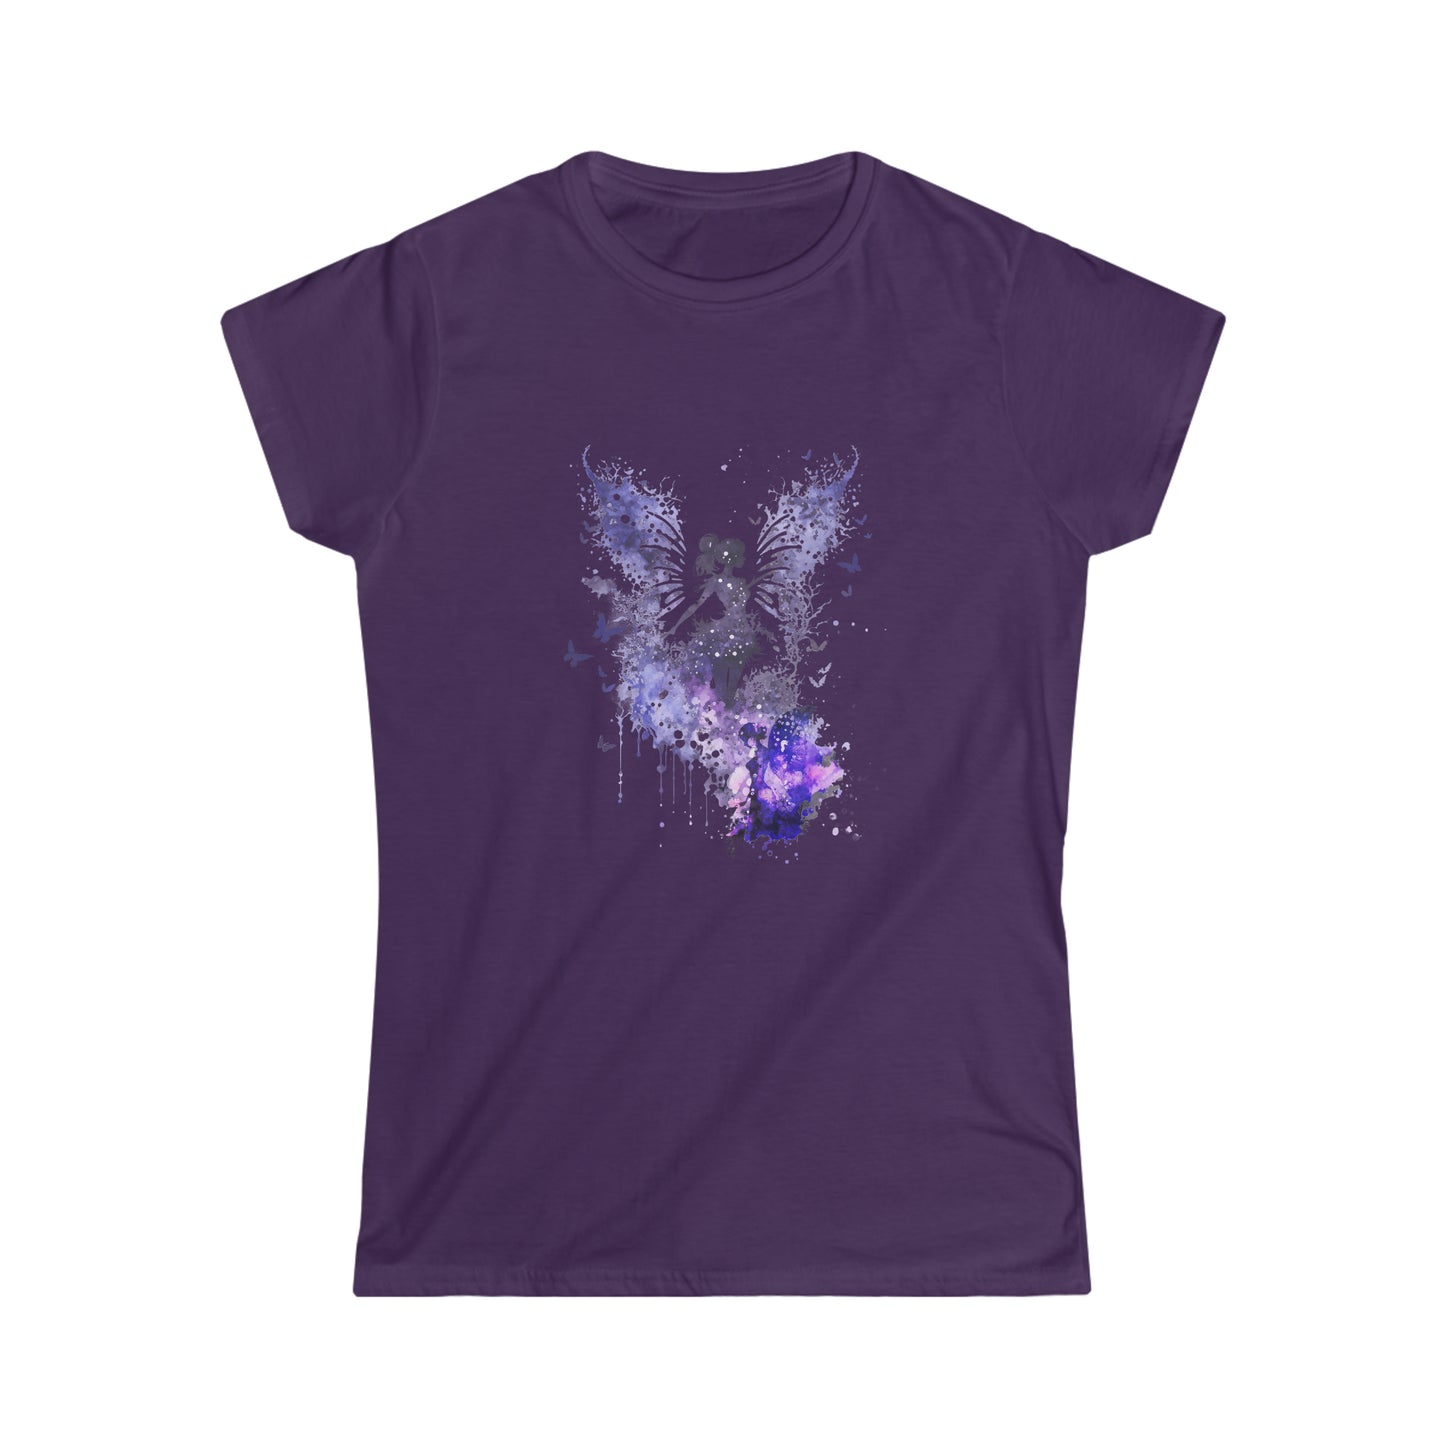 Women's Softstyle Tee - FAIRY - 12 SECONDS APPAREL